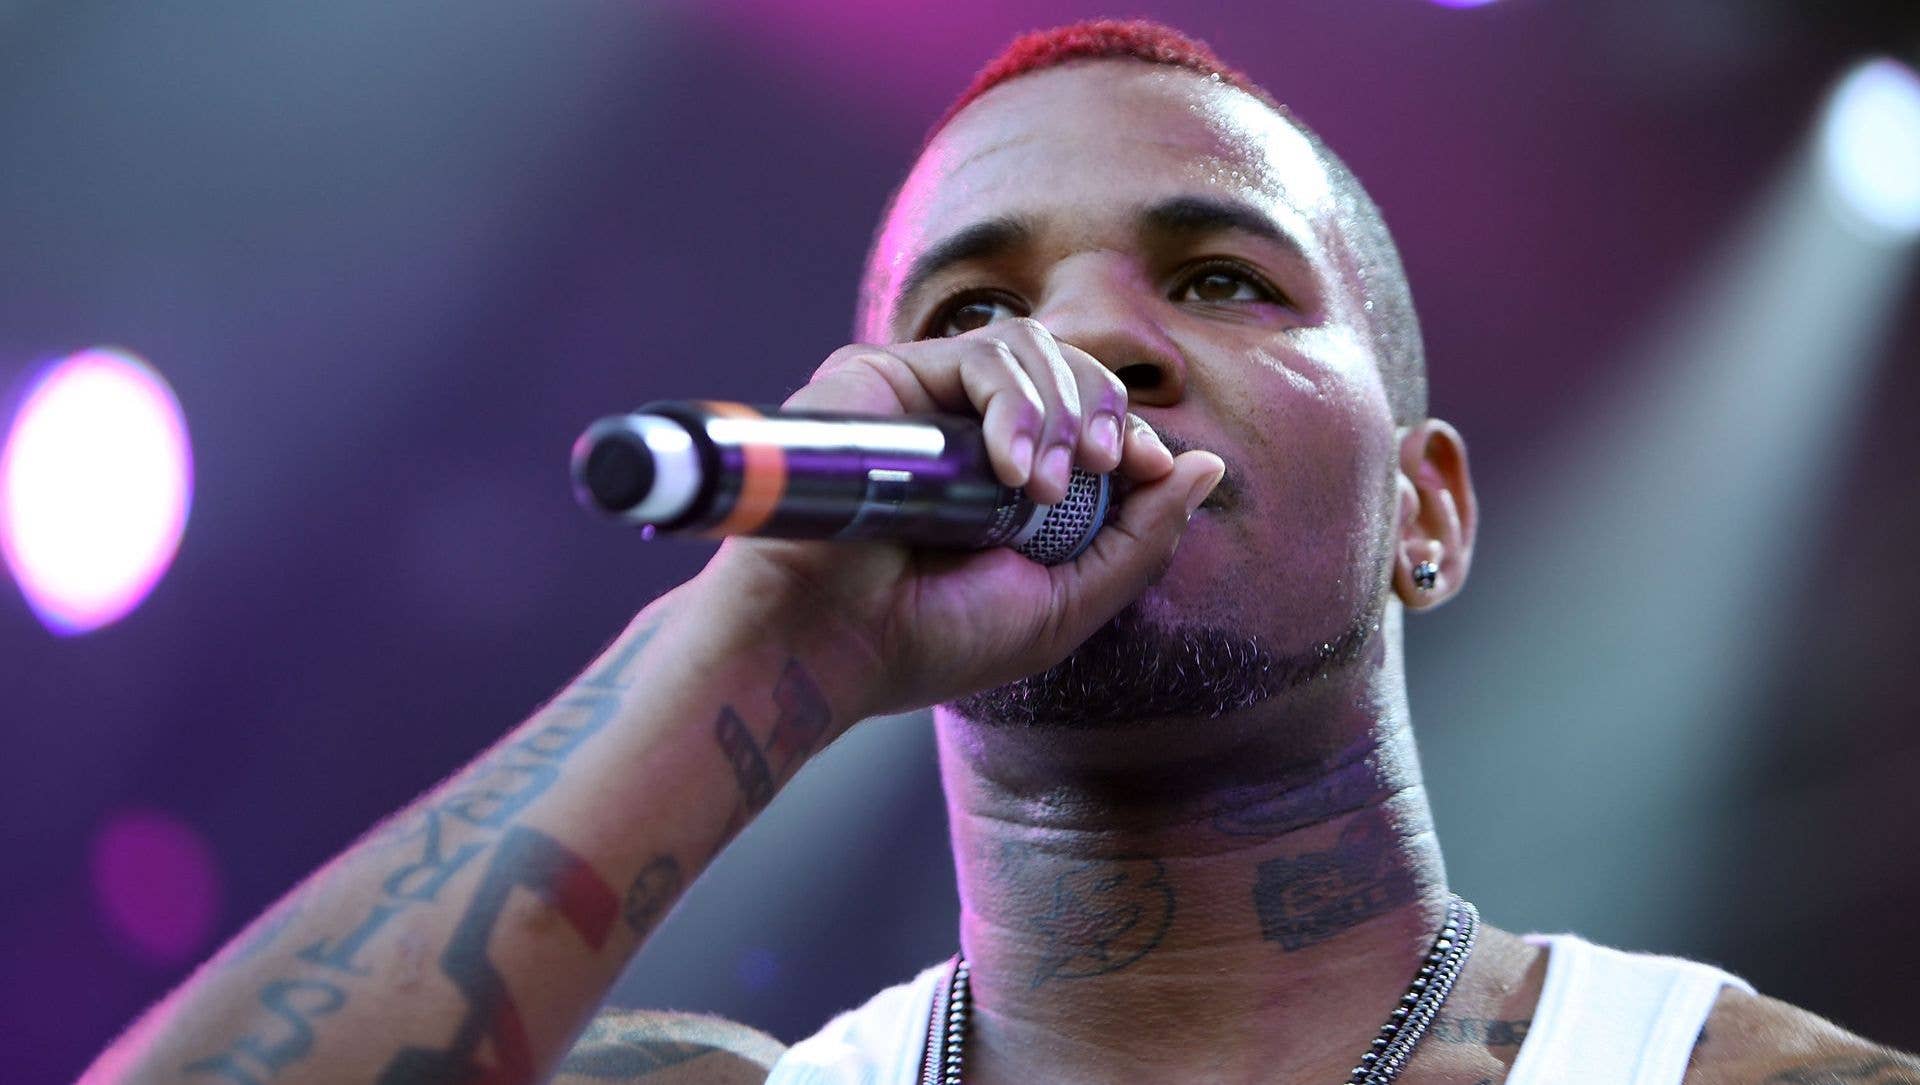 'Game' performs during Sydney Supafest Music Festival at ANZ Stadium